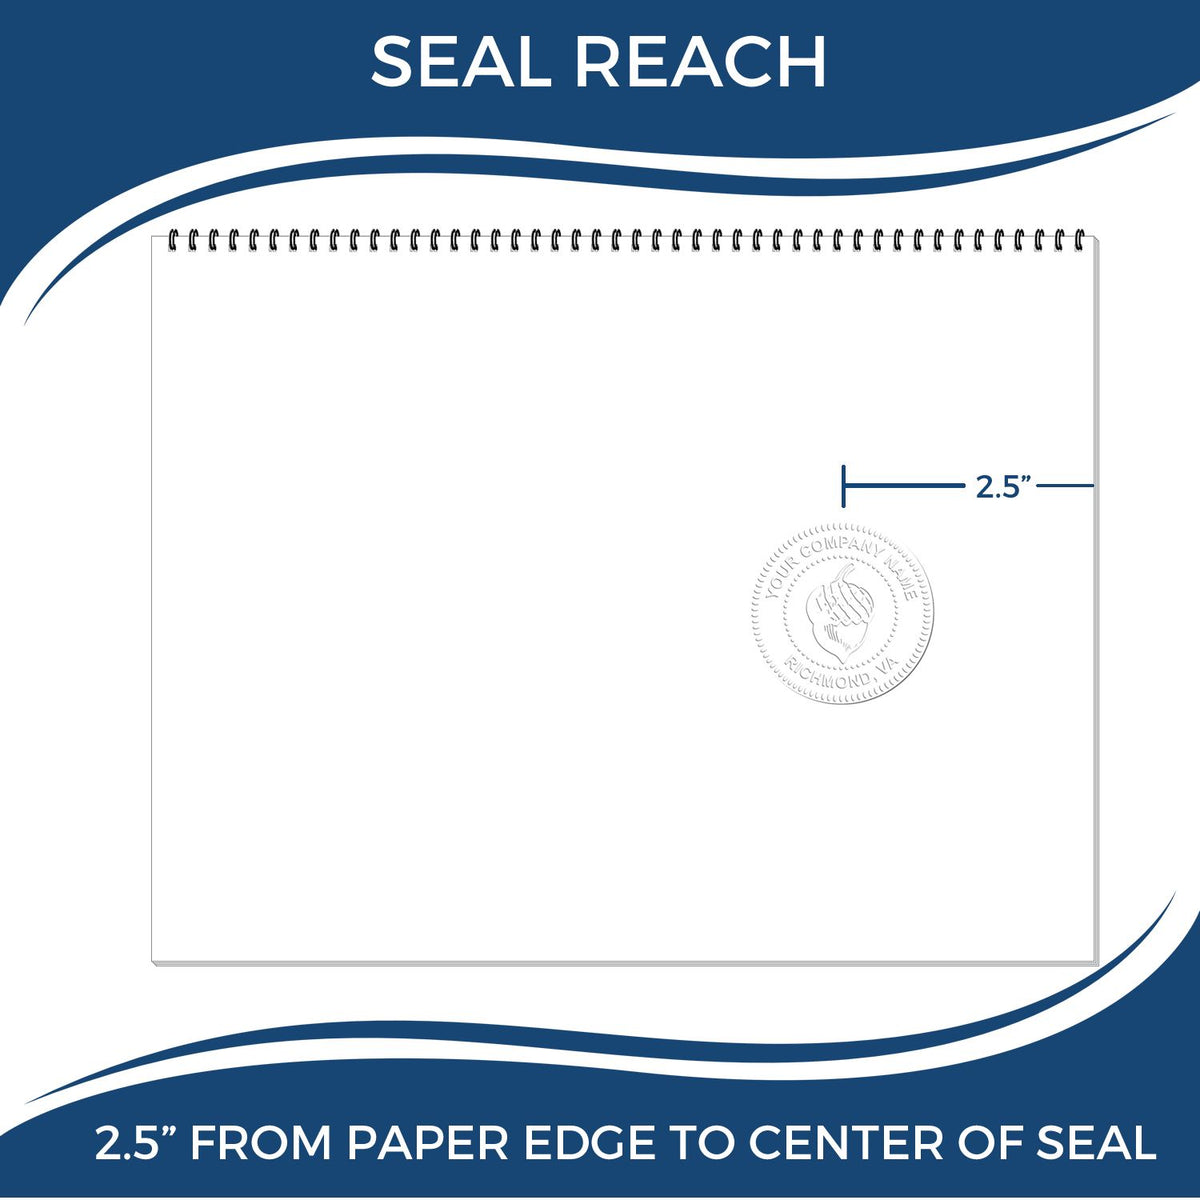 An infographic showing the seal reach which is represented by a ruler and a miniature seal image of the Heavy Duty Cast Iron Tennessee Engineer Seal Embosser